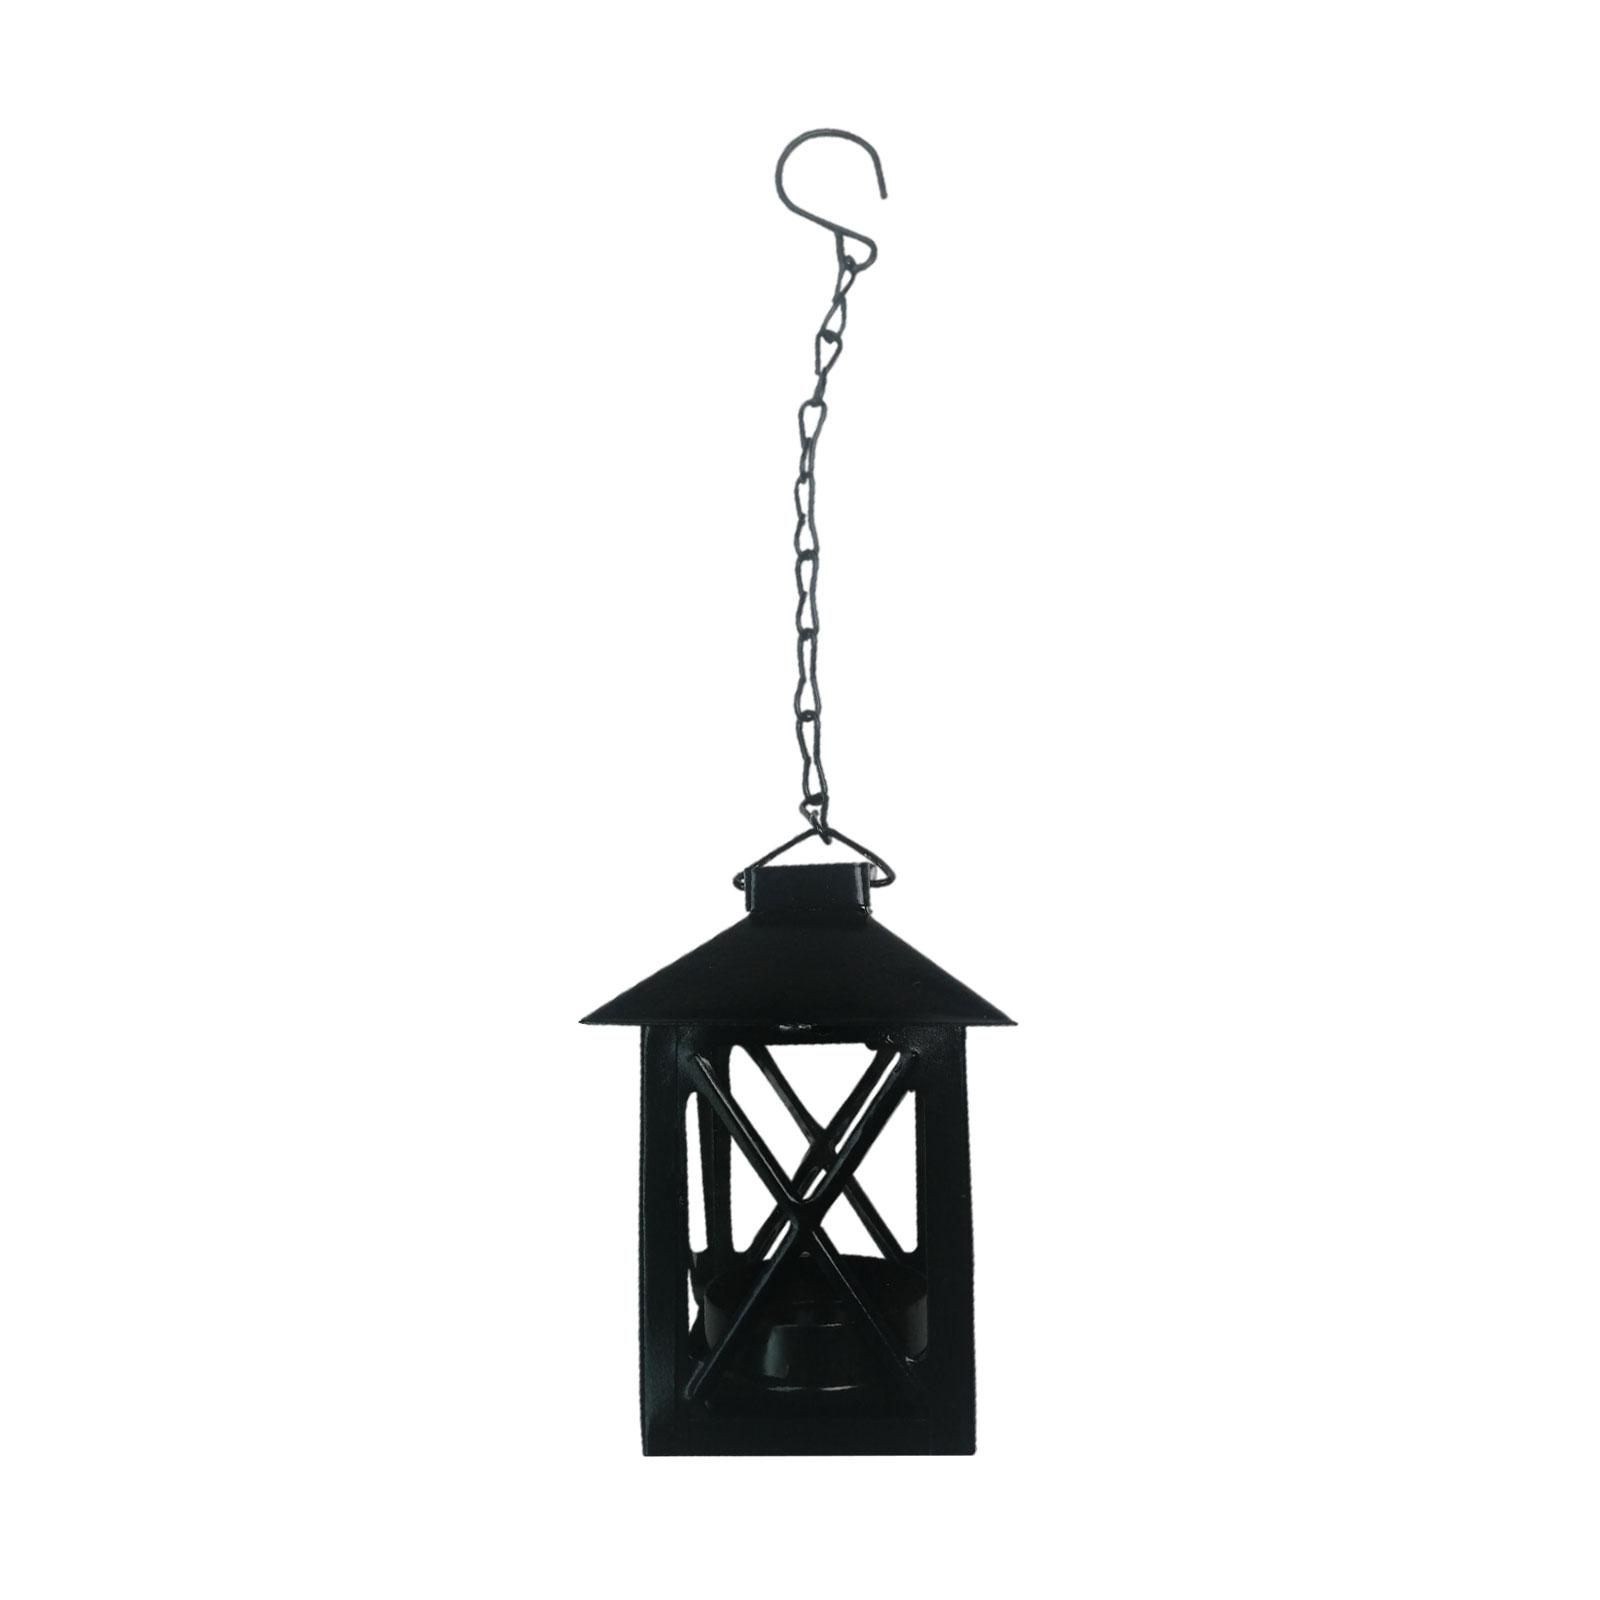 Style Wrought Iron Candle Lantern Hanging Tea Light Holder with Chain Black 